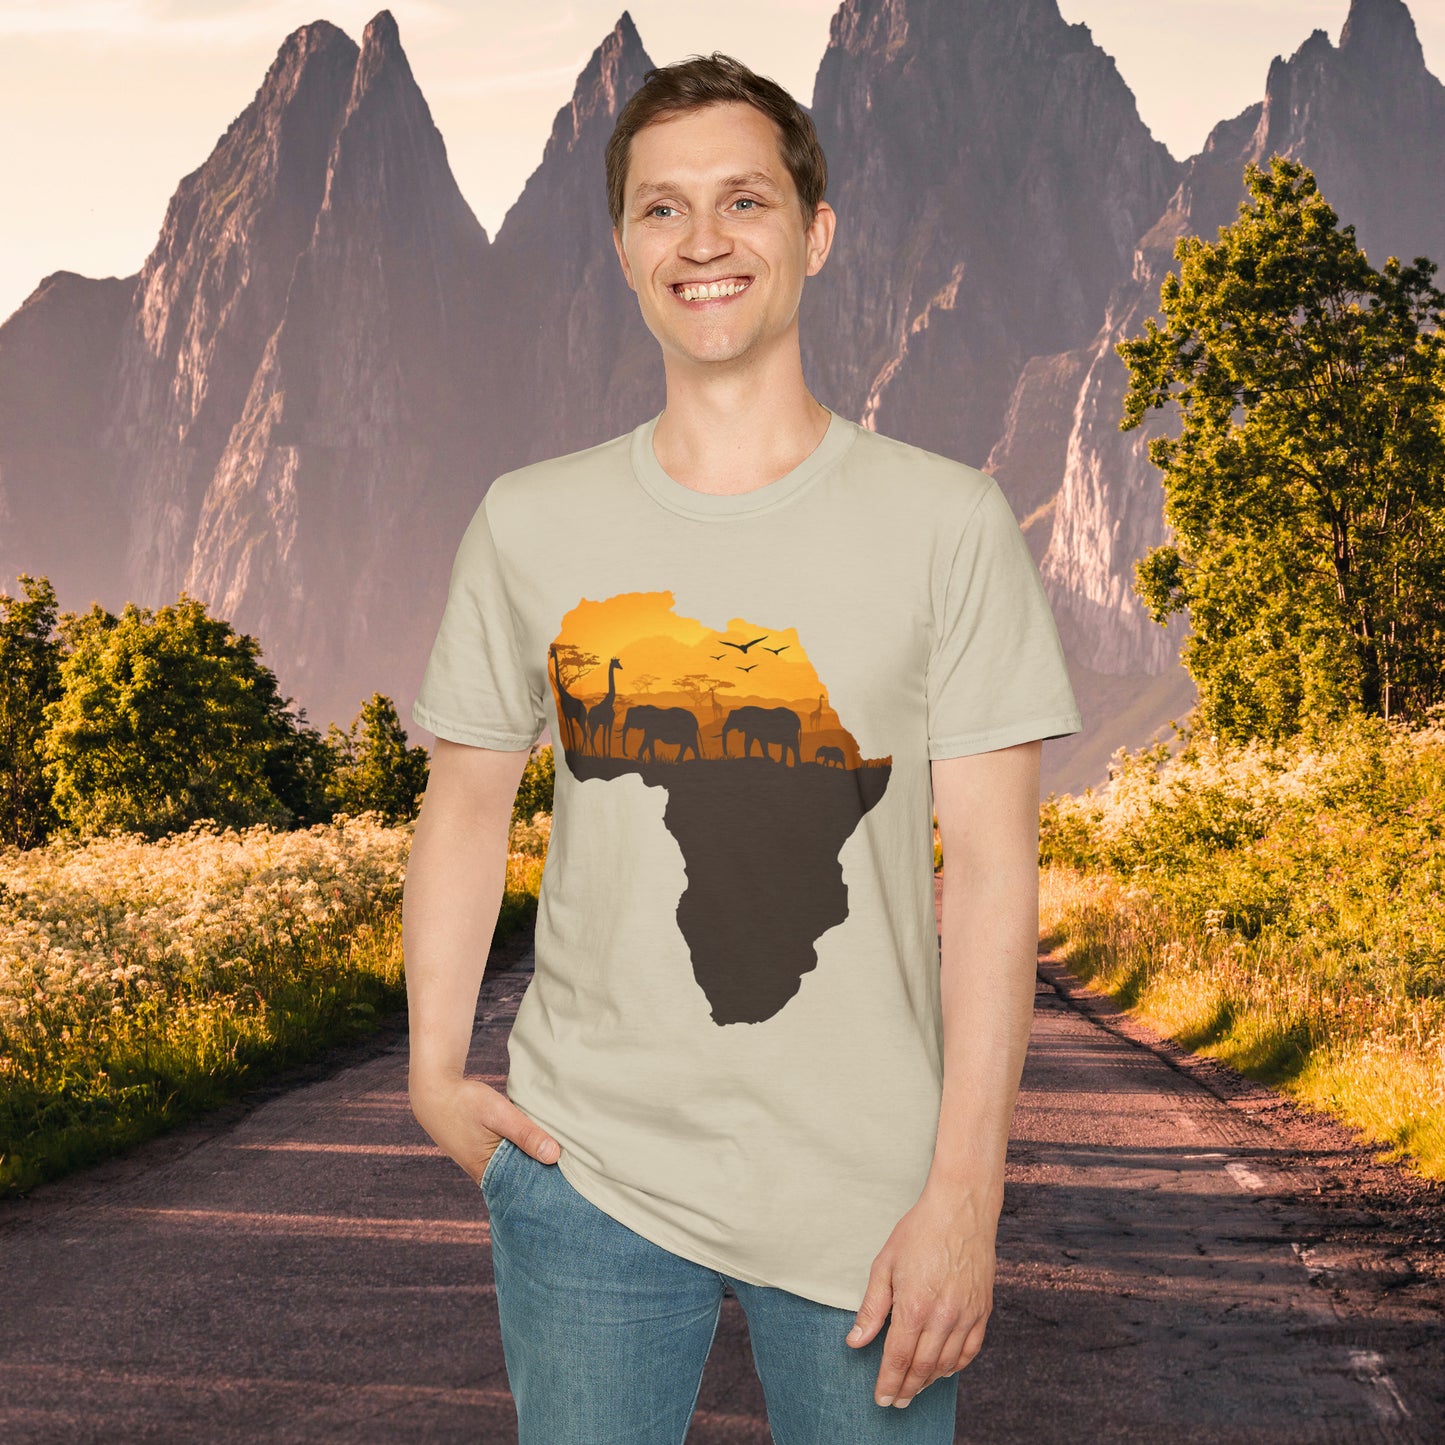 I love Africa and all its natural beauty, history and peoples inspire the design on this Unisex Softstyle T-Shirt. Giraffe, elephants, love all of them!